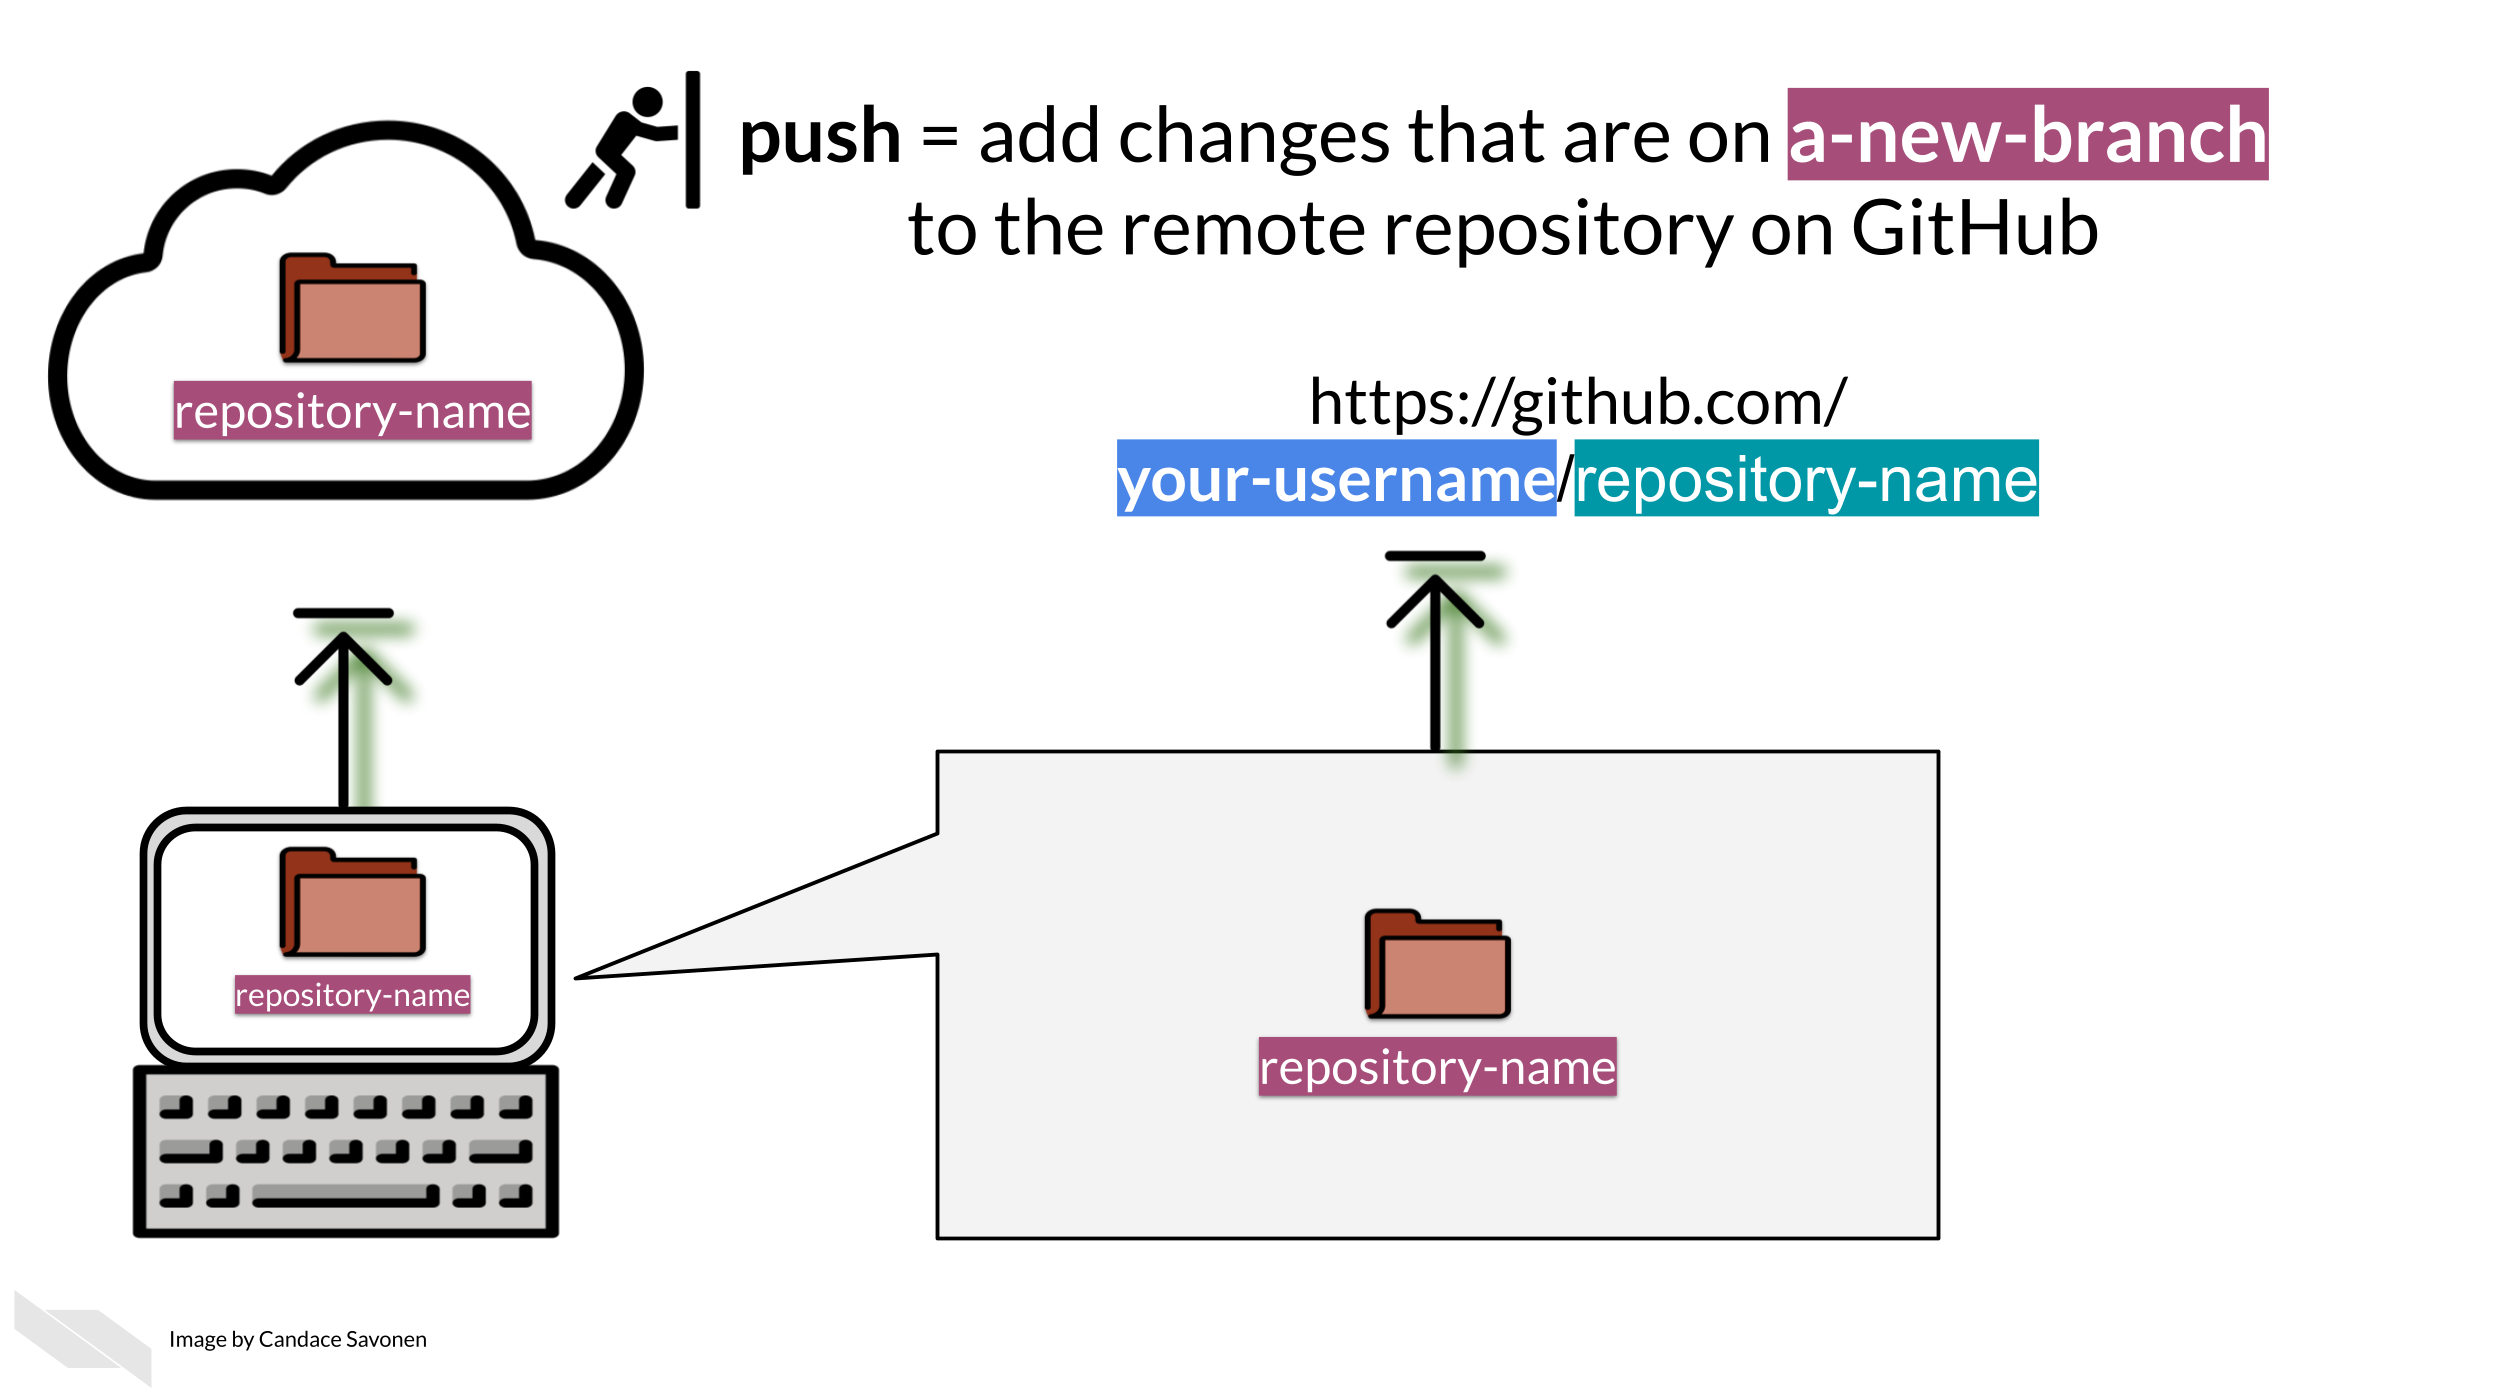 To push changes on GitHub means to add changes to the remote repository on GitHub.